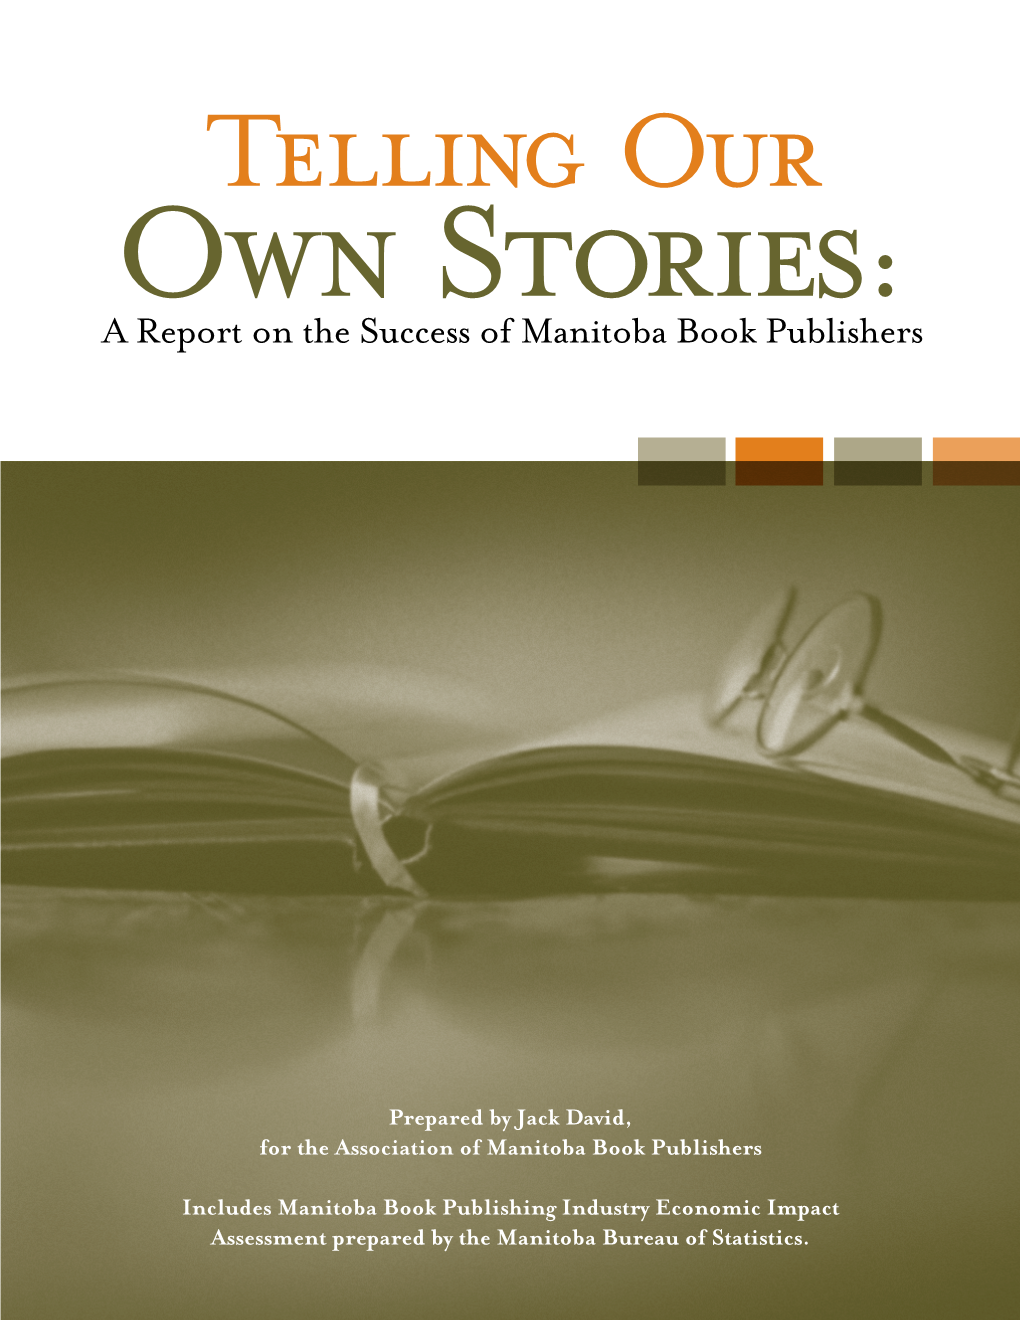 A Report on the Success of Manitoba Book Publishers